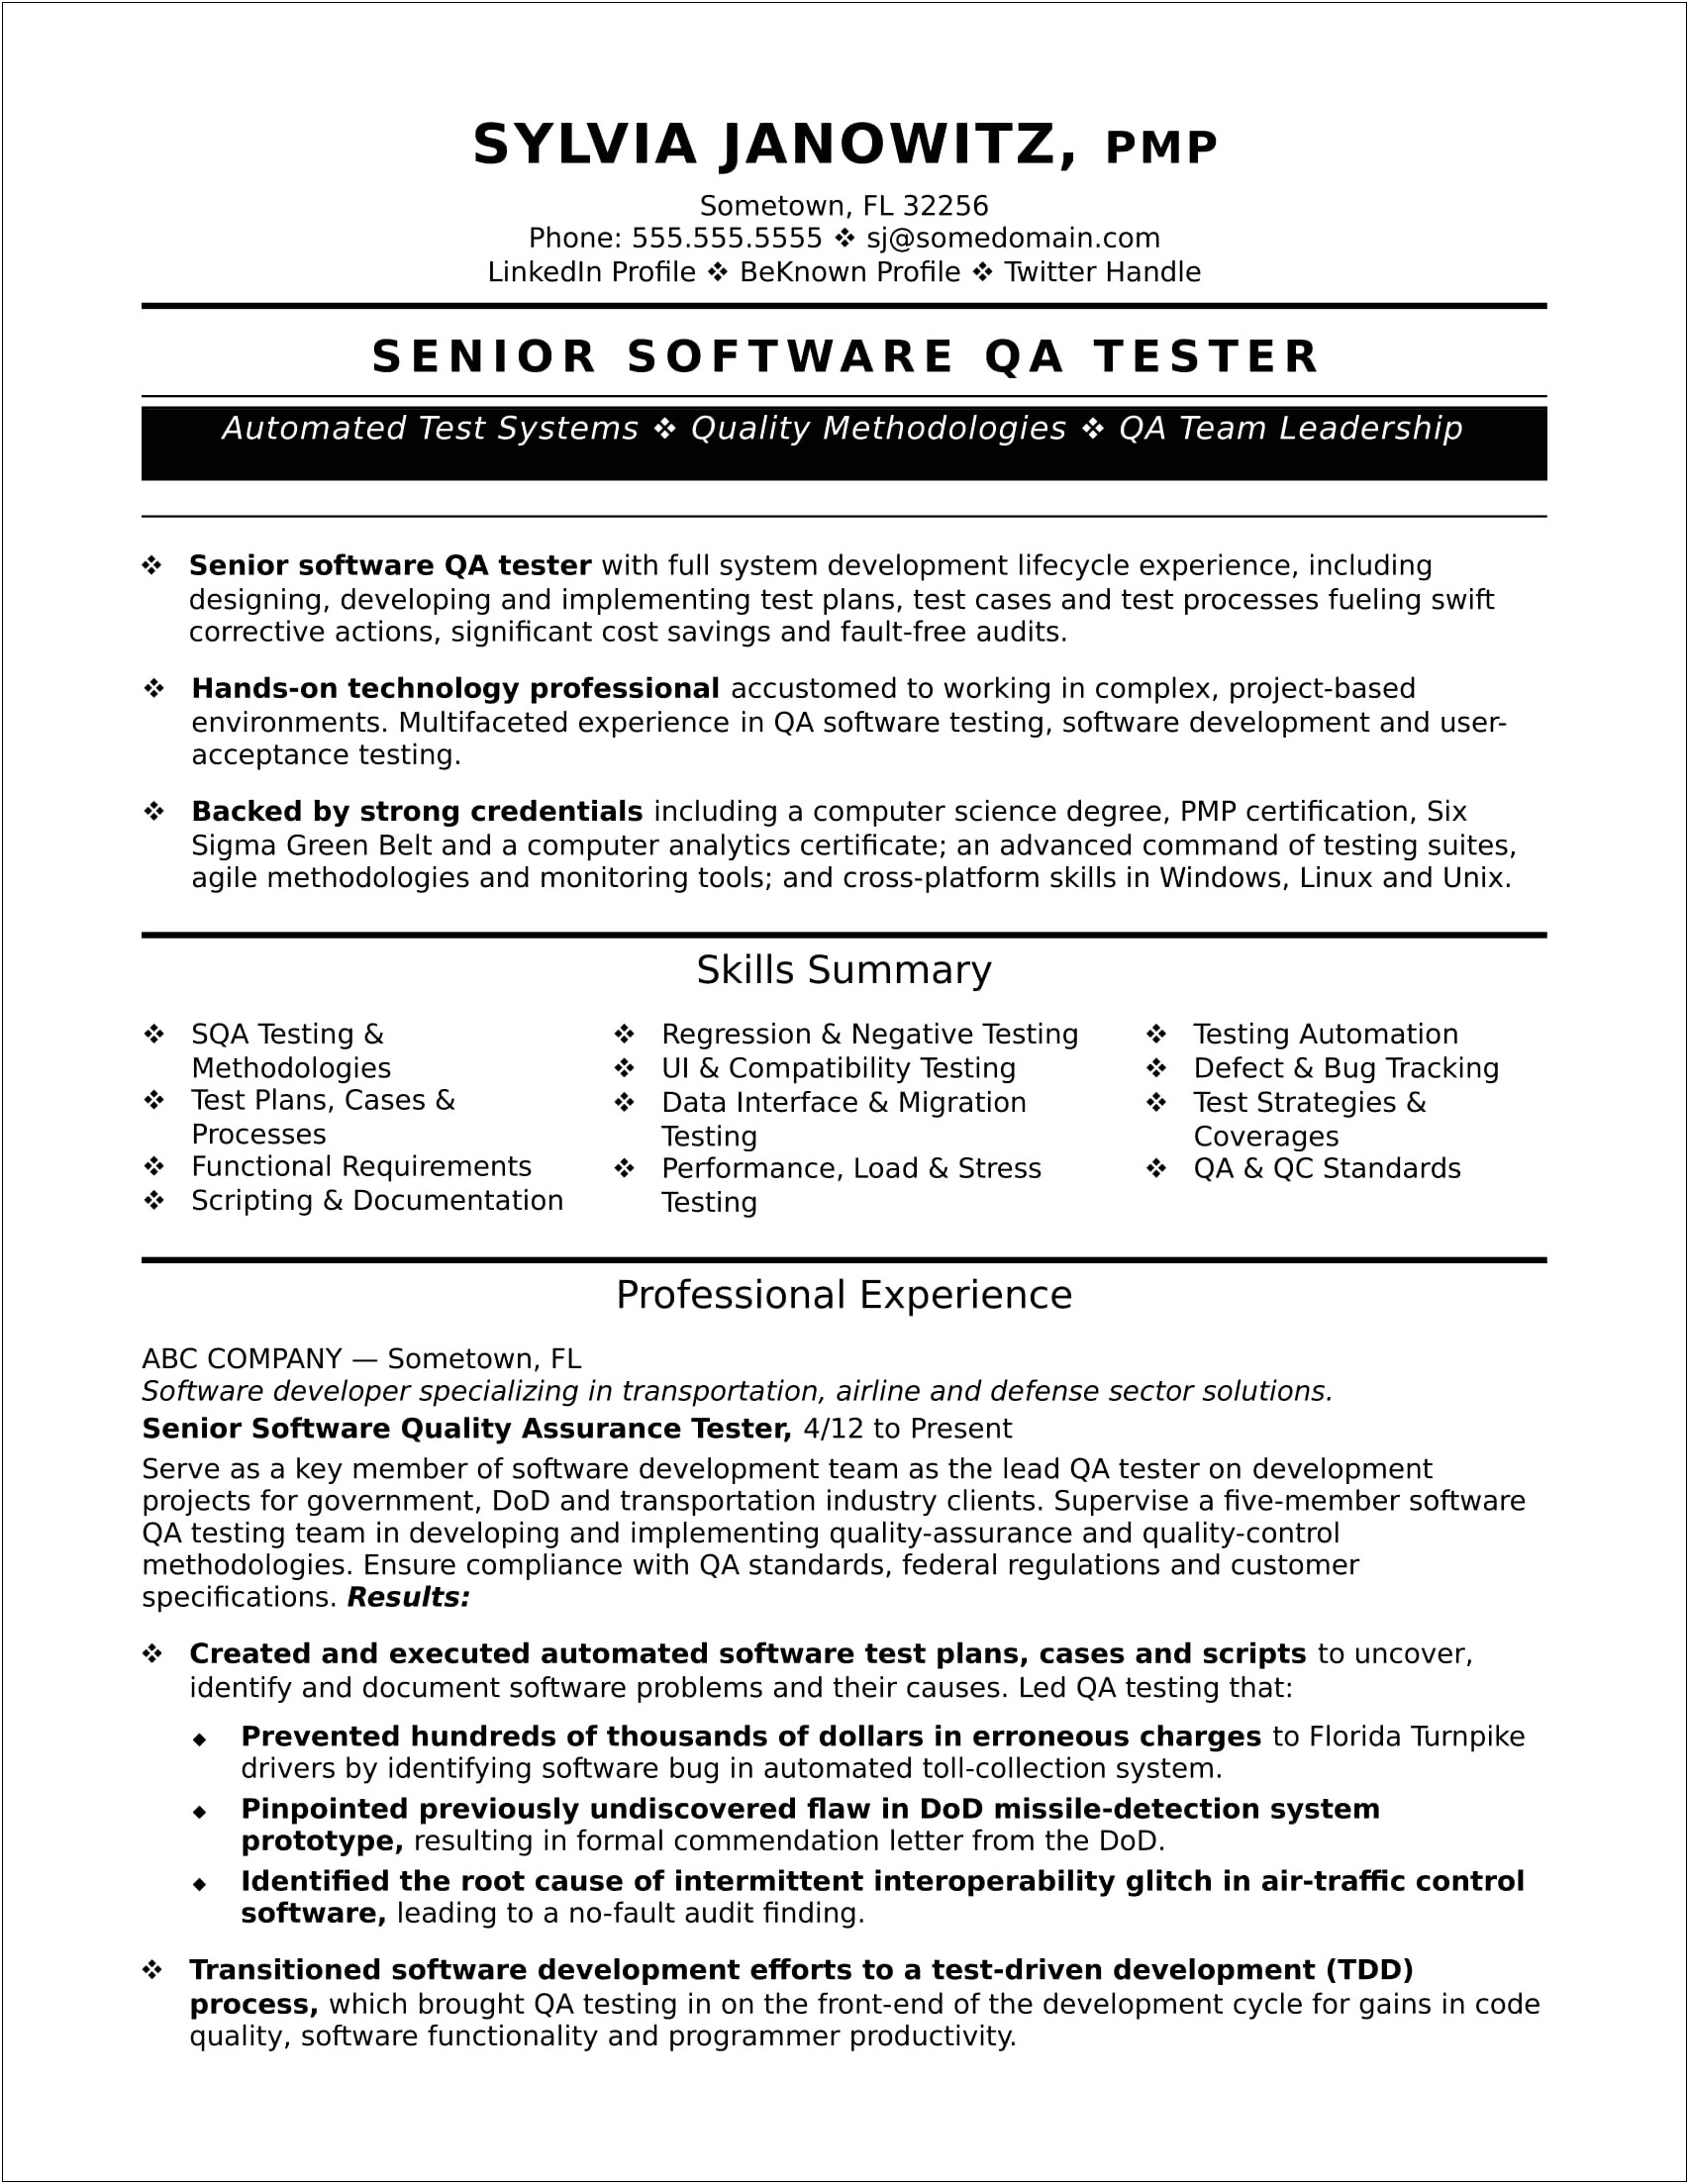 Objective For Resume For Quality Analyst